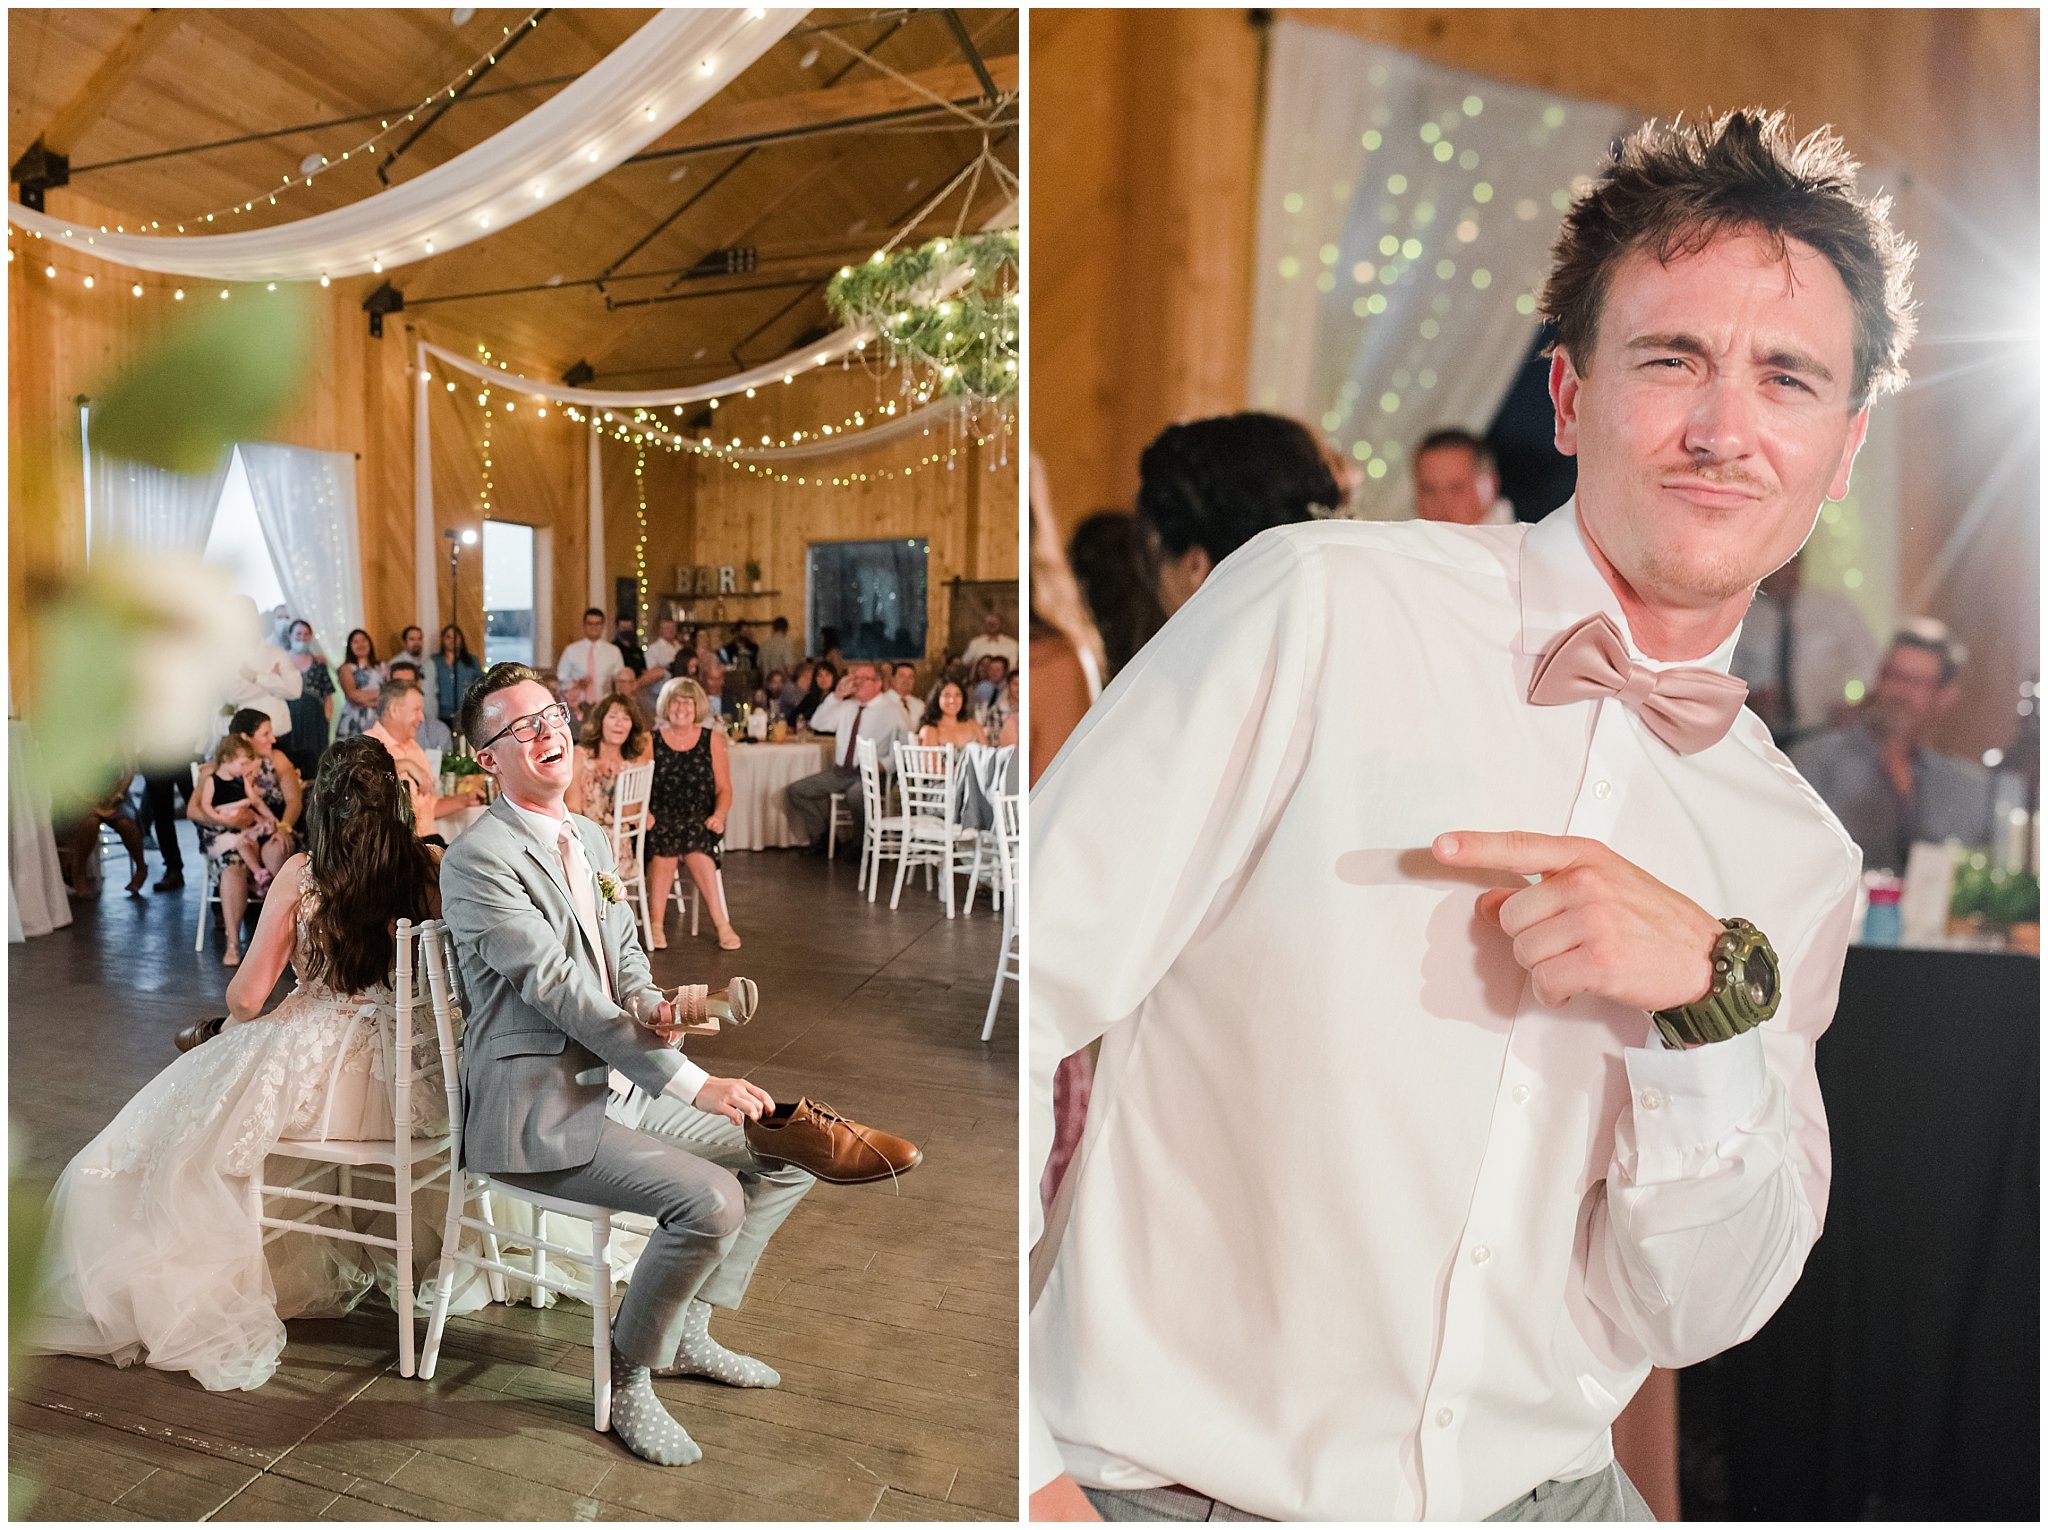 Party Dancing | Oak Hills Utah Dusty Rose and Gray Summer Wedding | Jessie and Dallin Photography